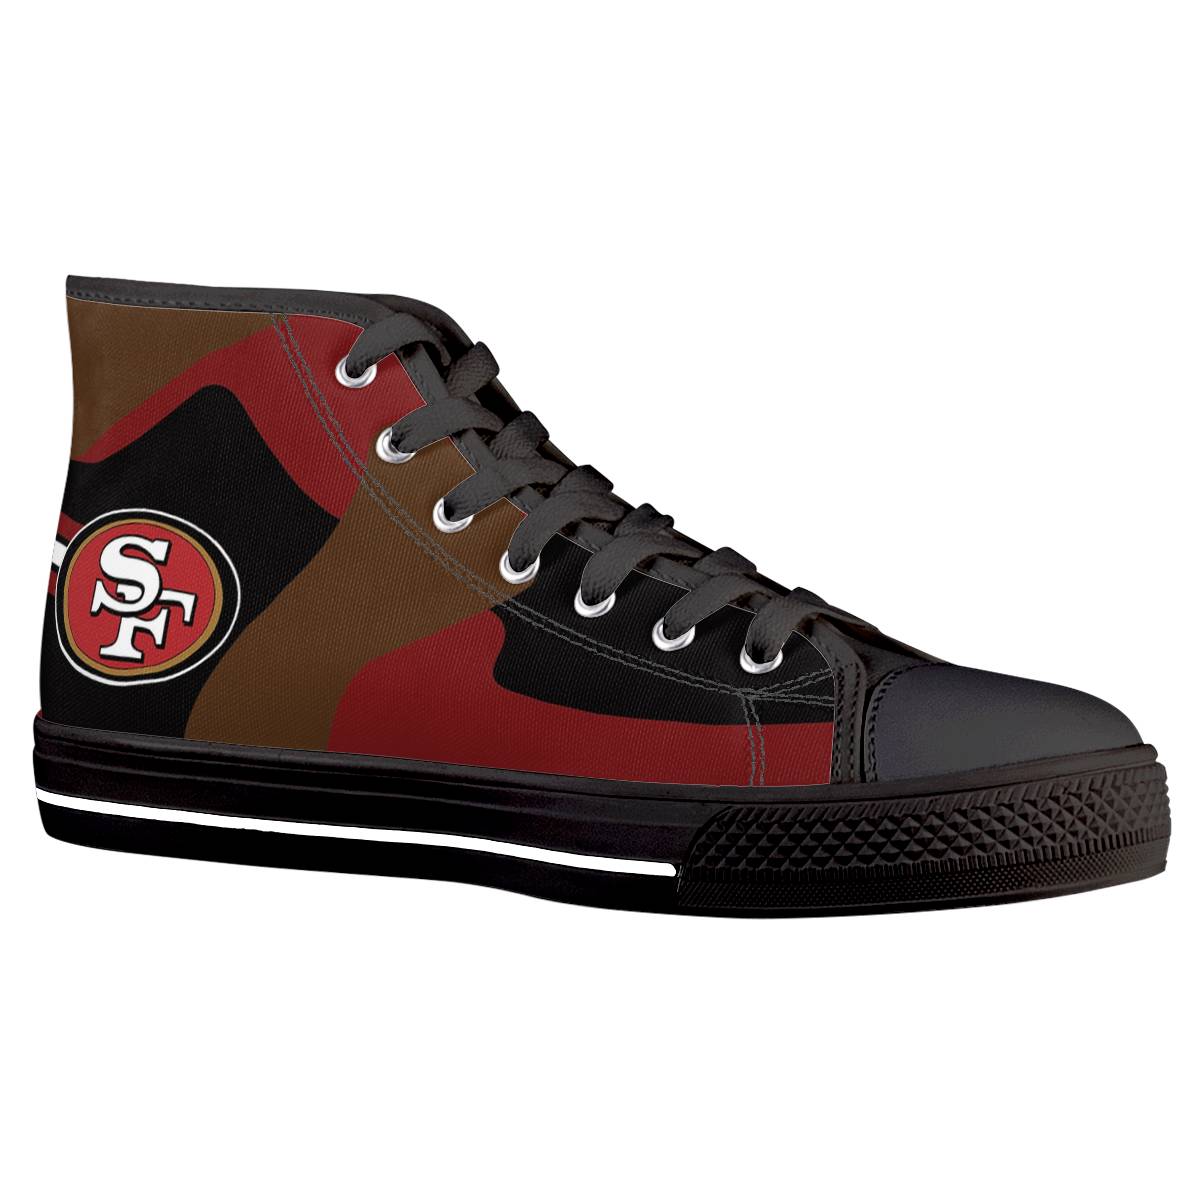 Women's San Francisco 49ers High Top Canvas Sneakers 005